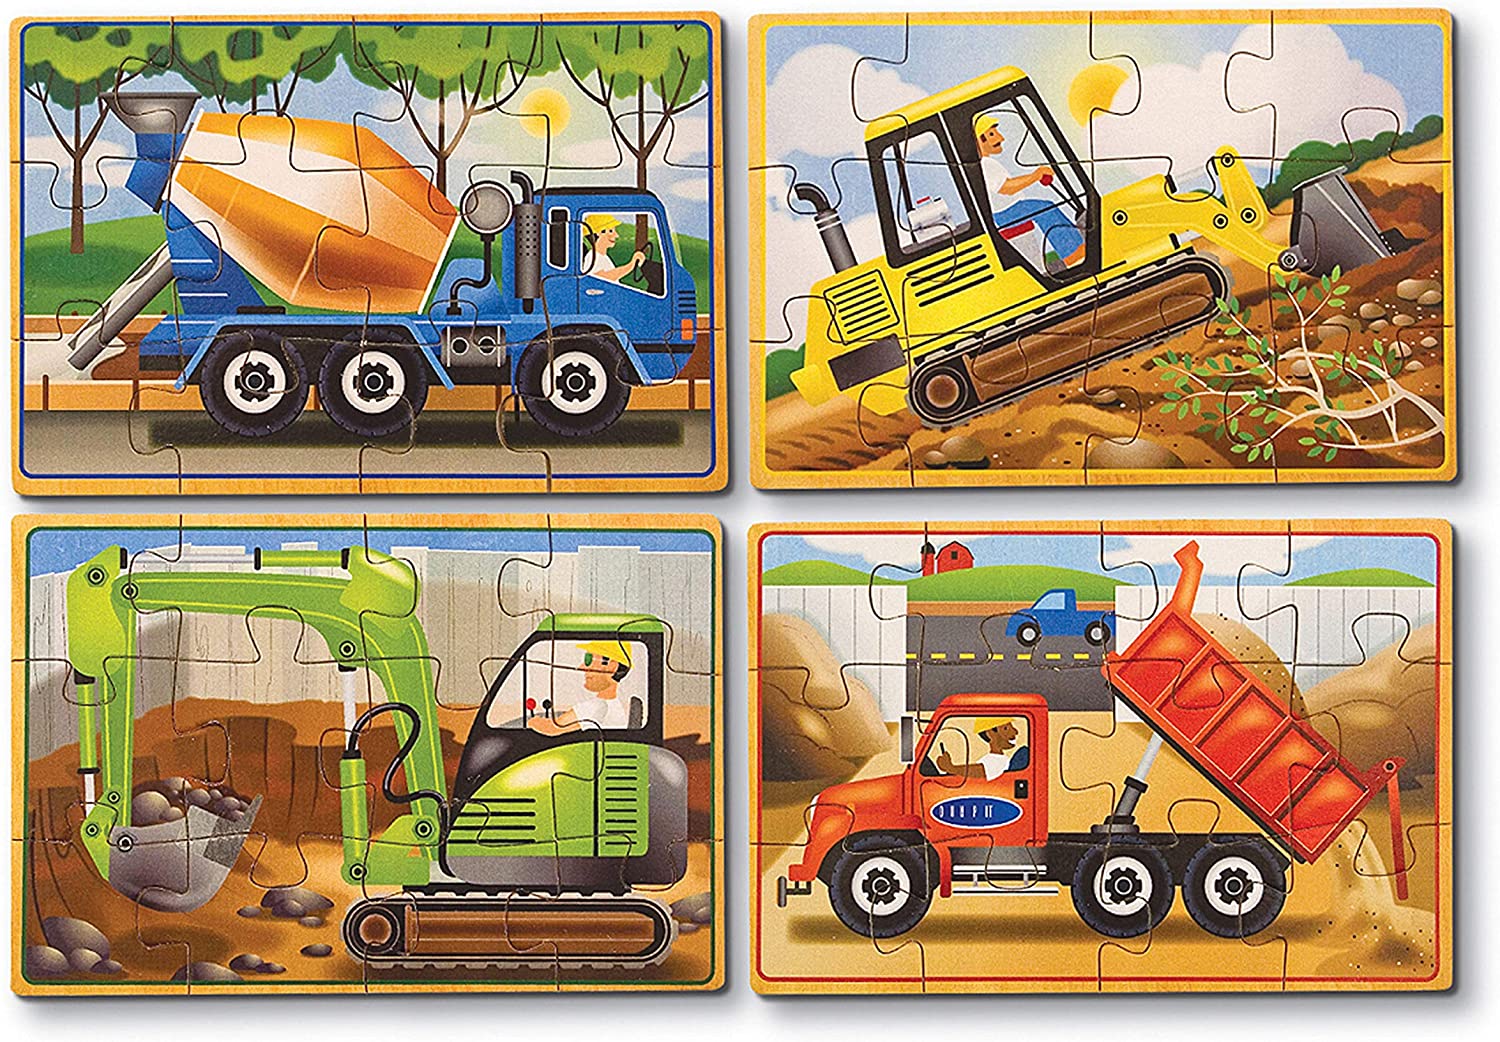 Melissa & Doug Construction Vehicles 4-in-1 Wooden Jigsaw Puzzles $6.79